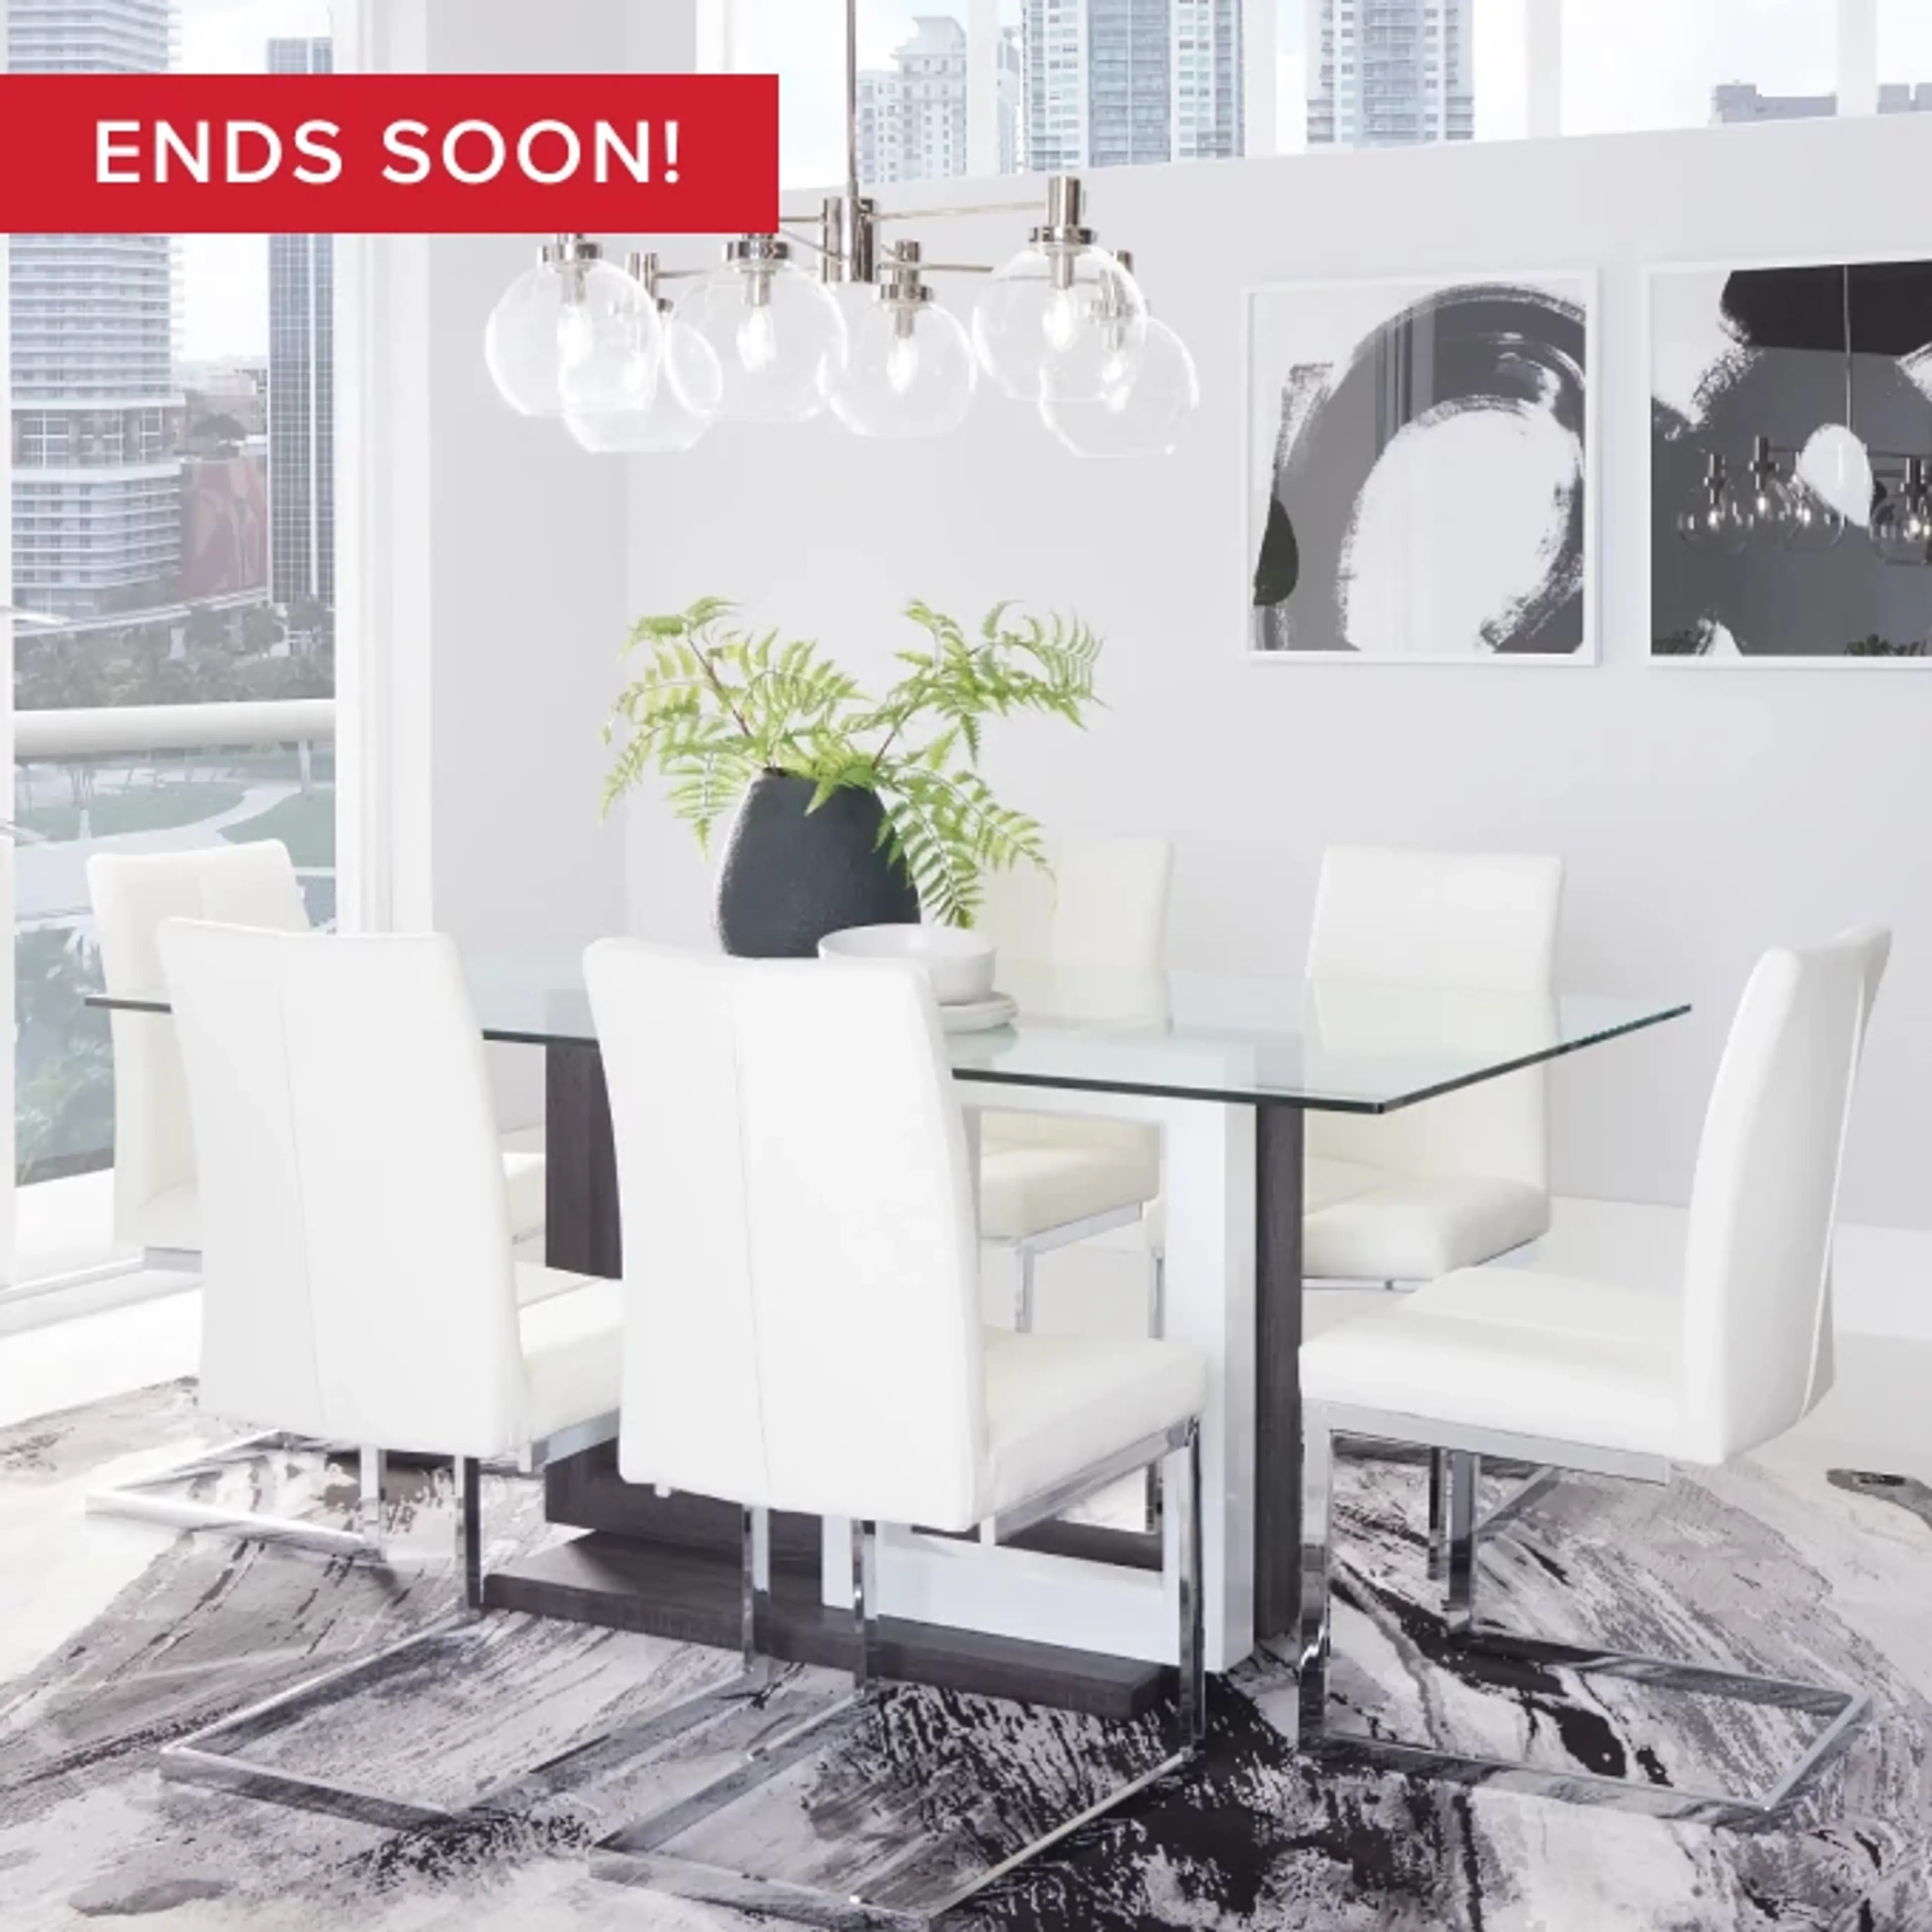 UP TO 20% OFF DINING SETS*